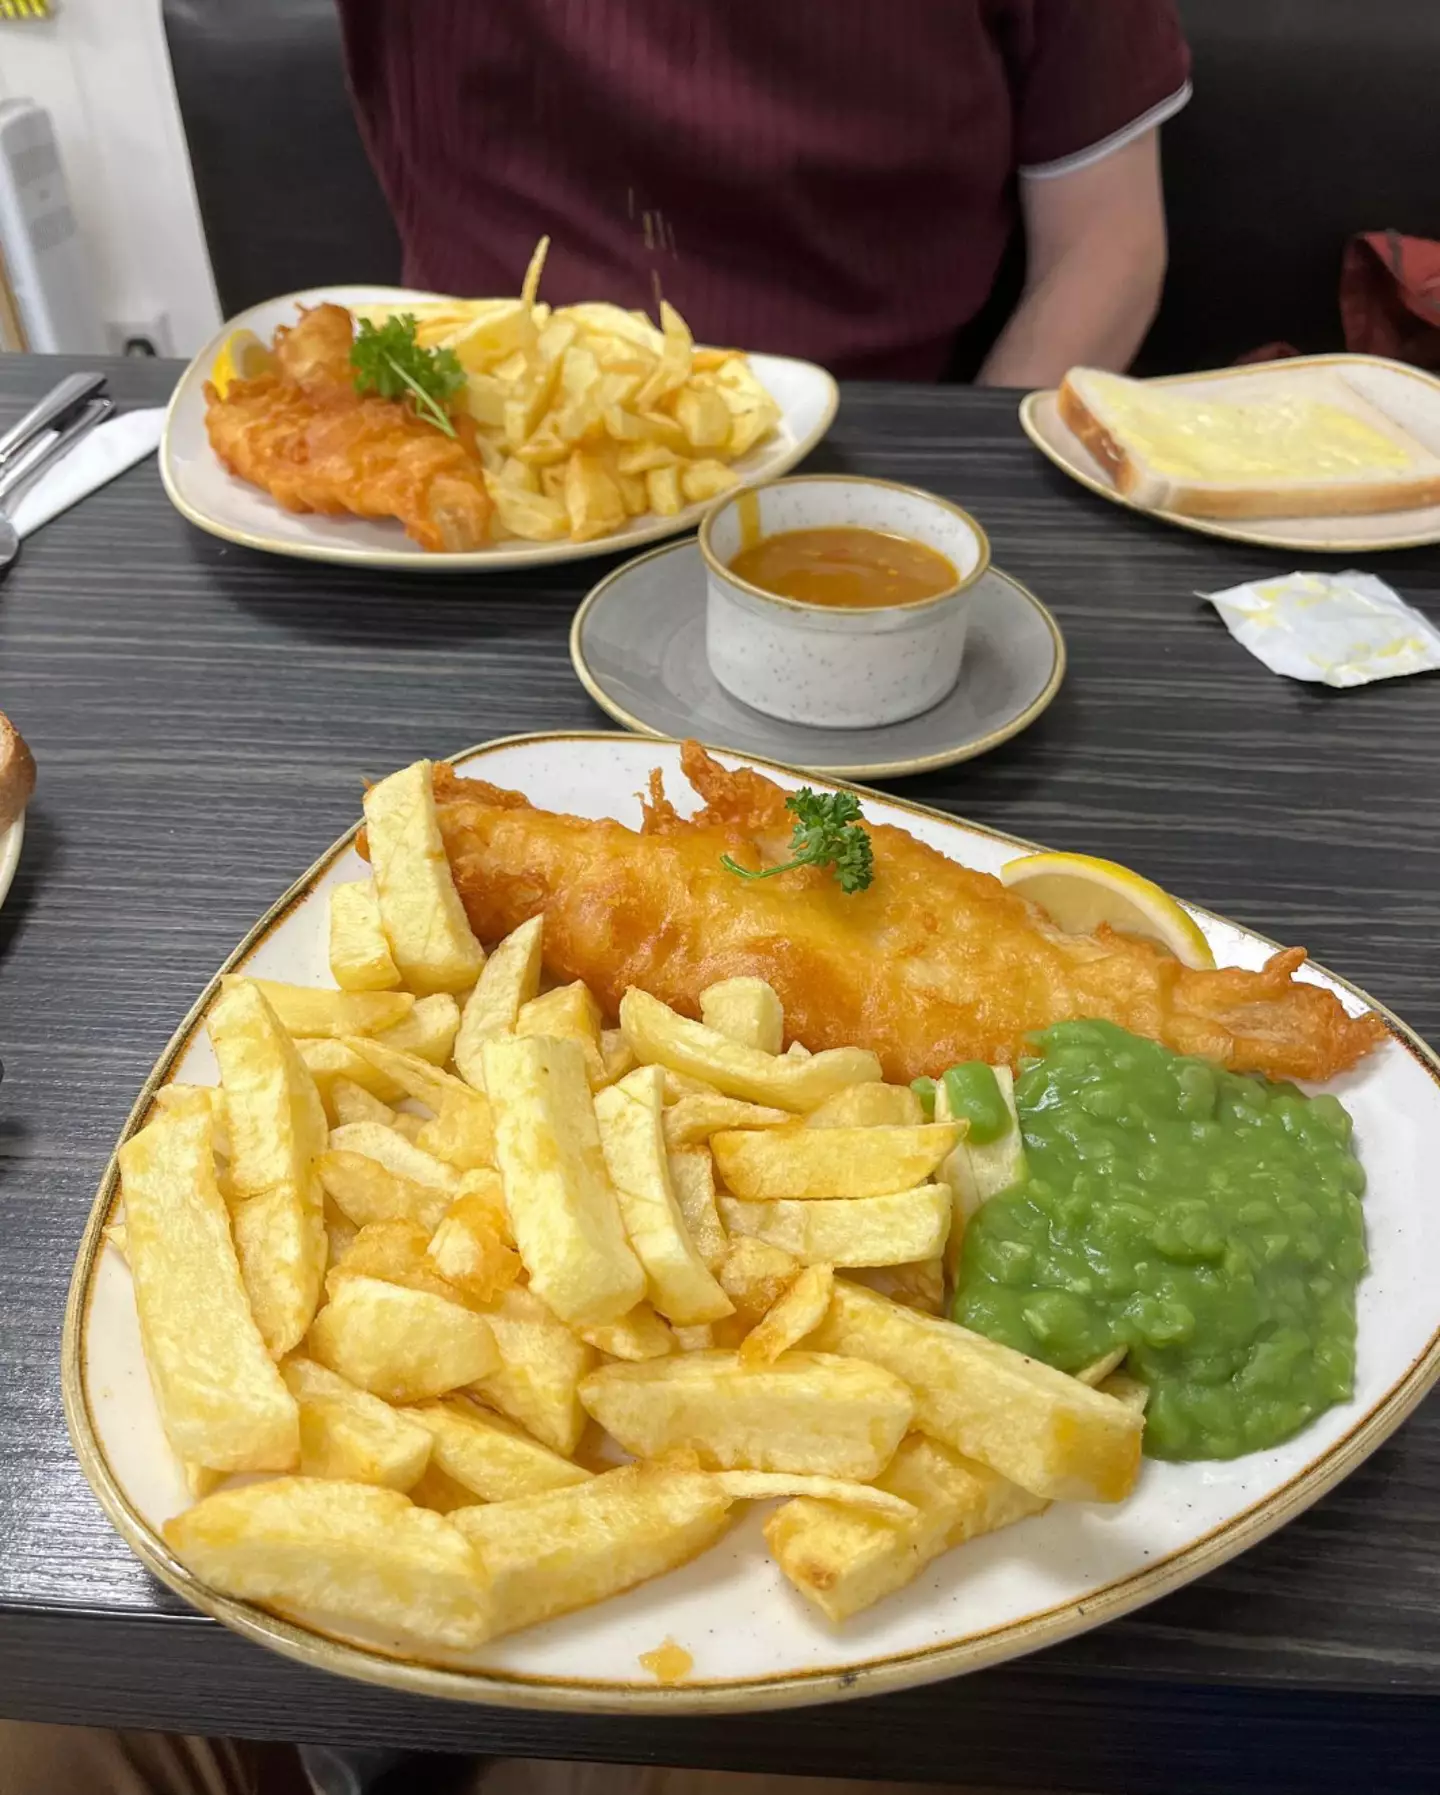 You can't beat a plate of fish and chips.